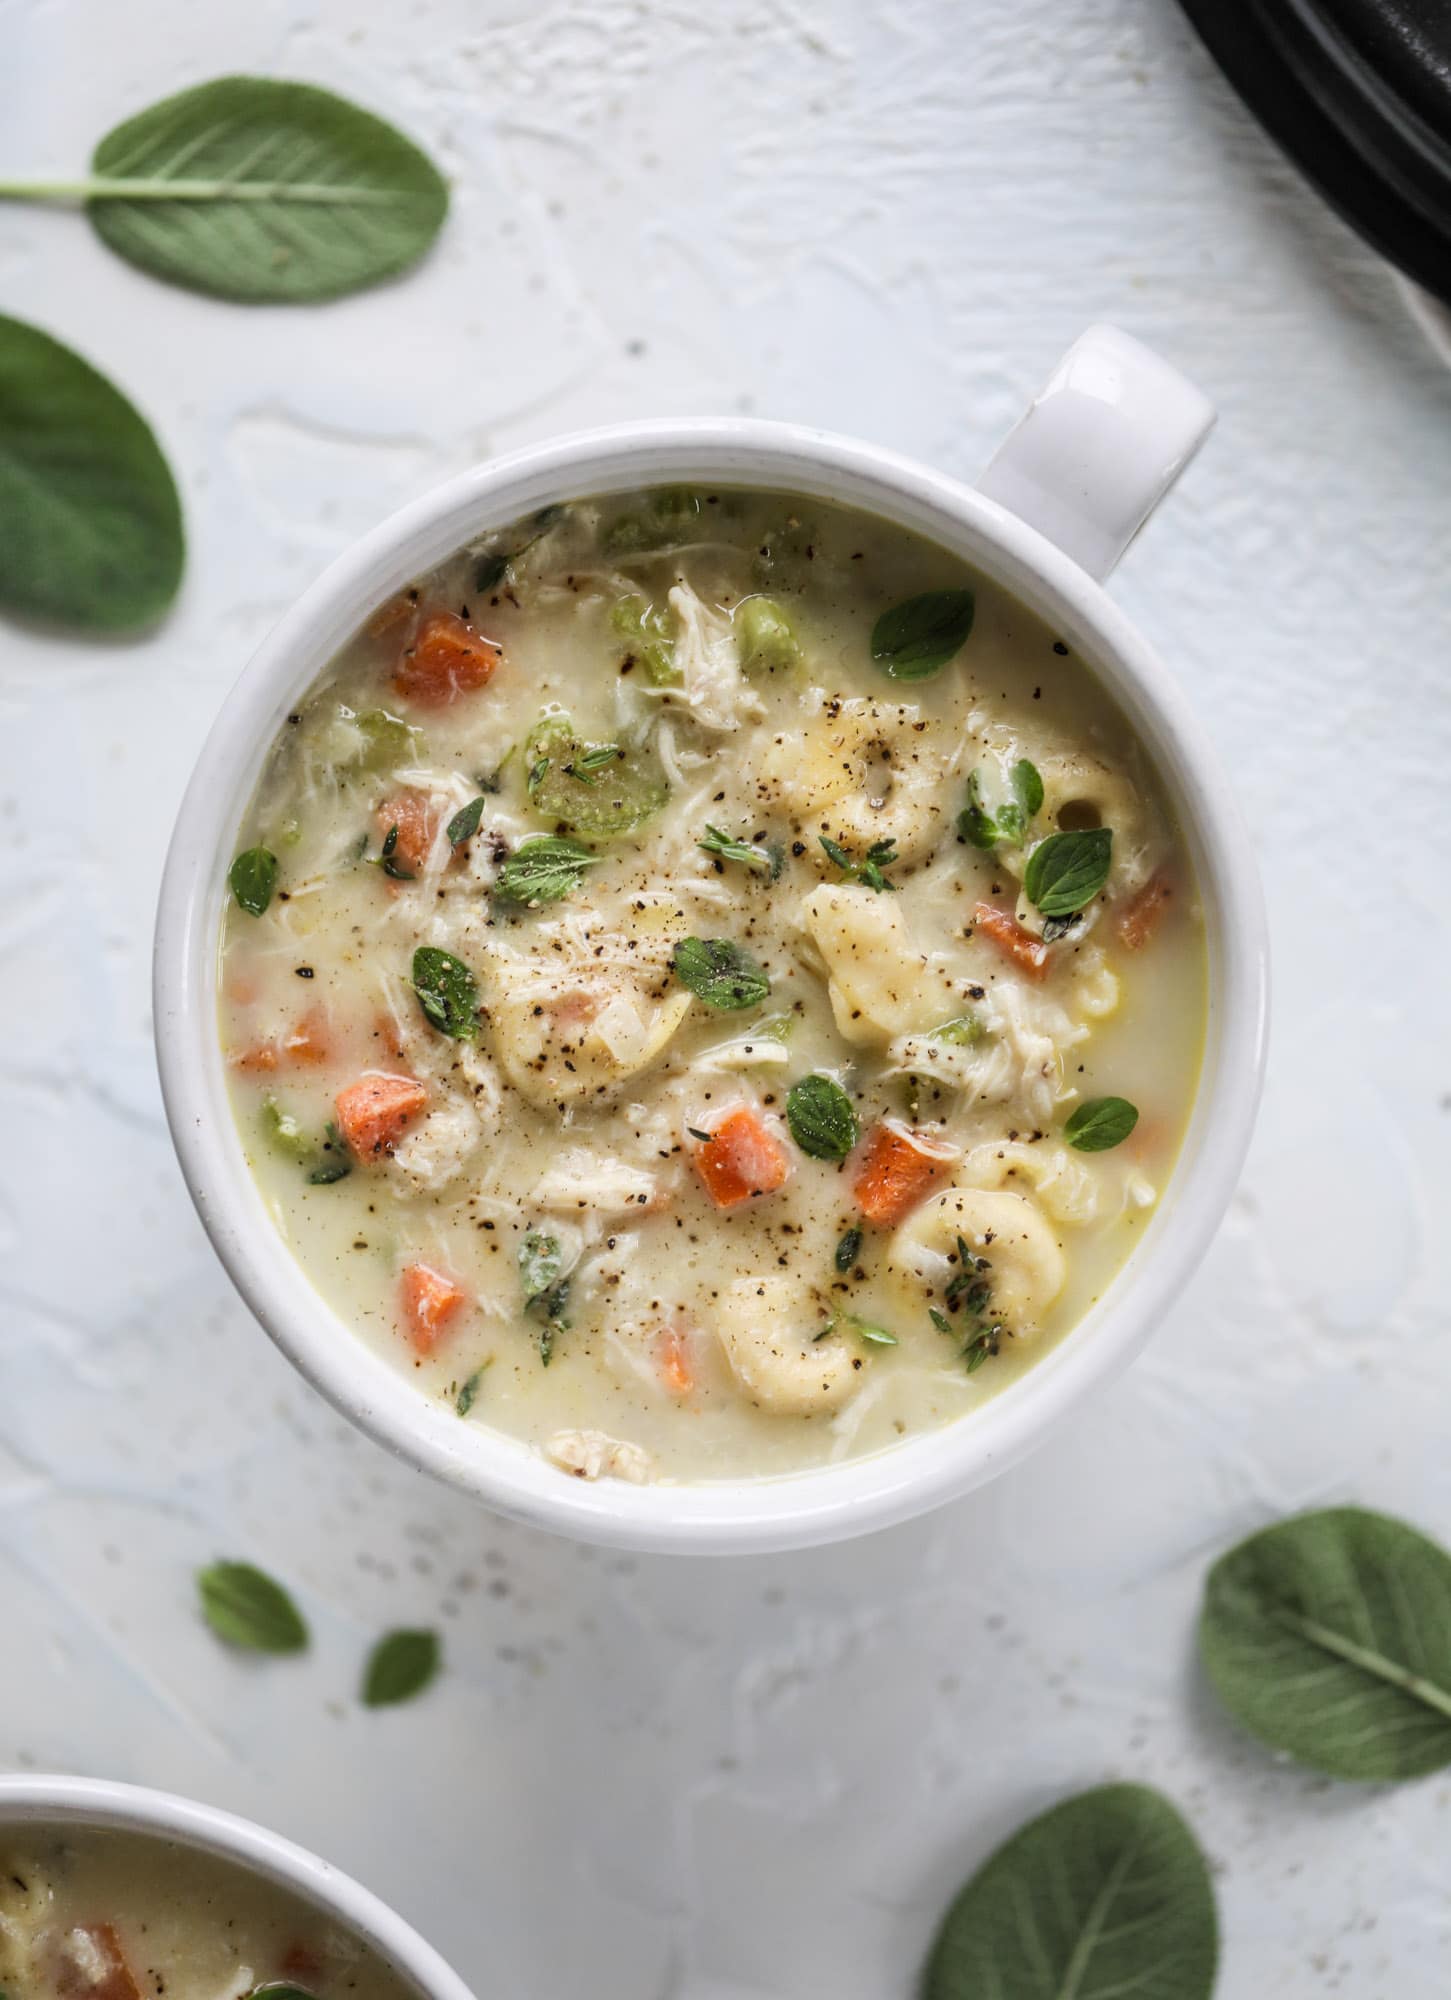 This creamy chicken tortellini soup is the perfect weeknight meal! It comes together quickly and is a great meal to use up a rotisserie chicken. It's satisfying and hearty, with tortellini replacing egg noodles for the pasta. Comfort food perfection! I howsweeteats.com #chicken #soup